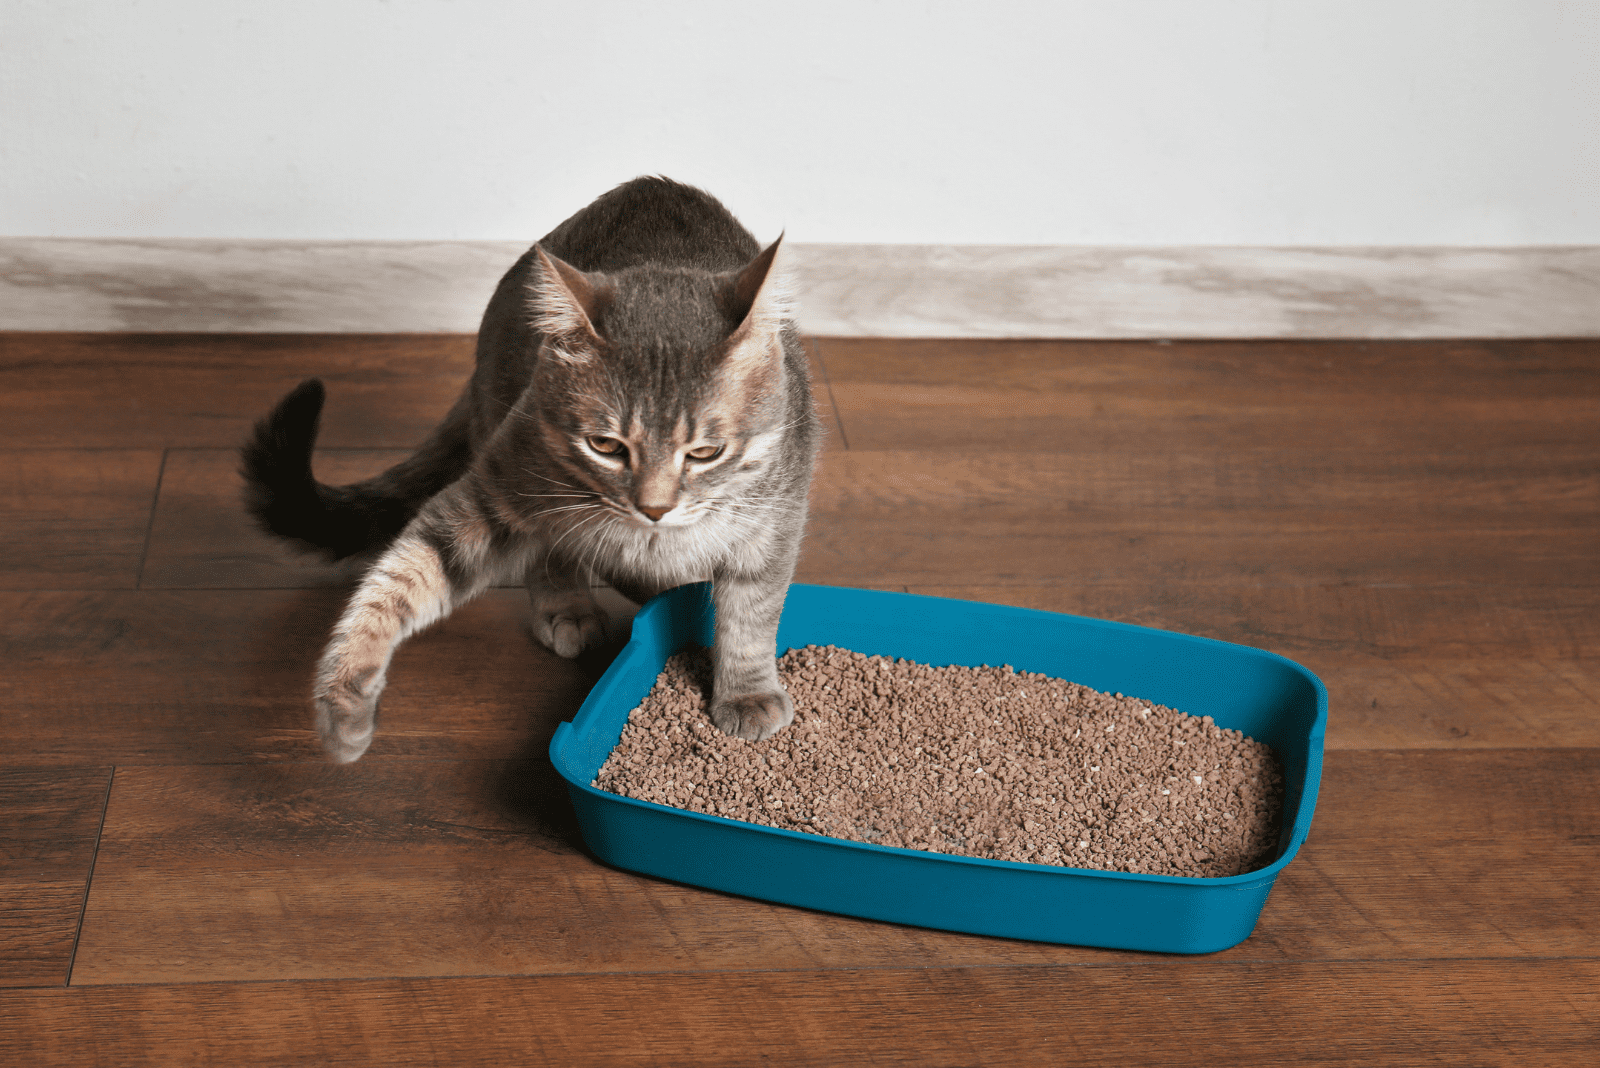 the cat pees next to the litter box.